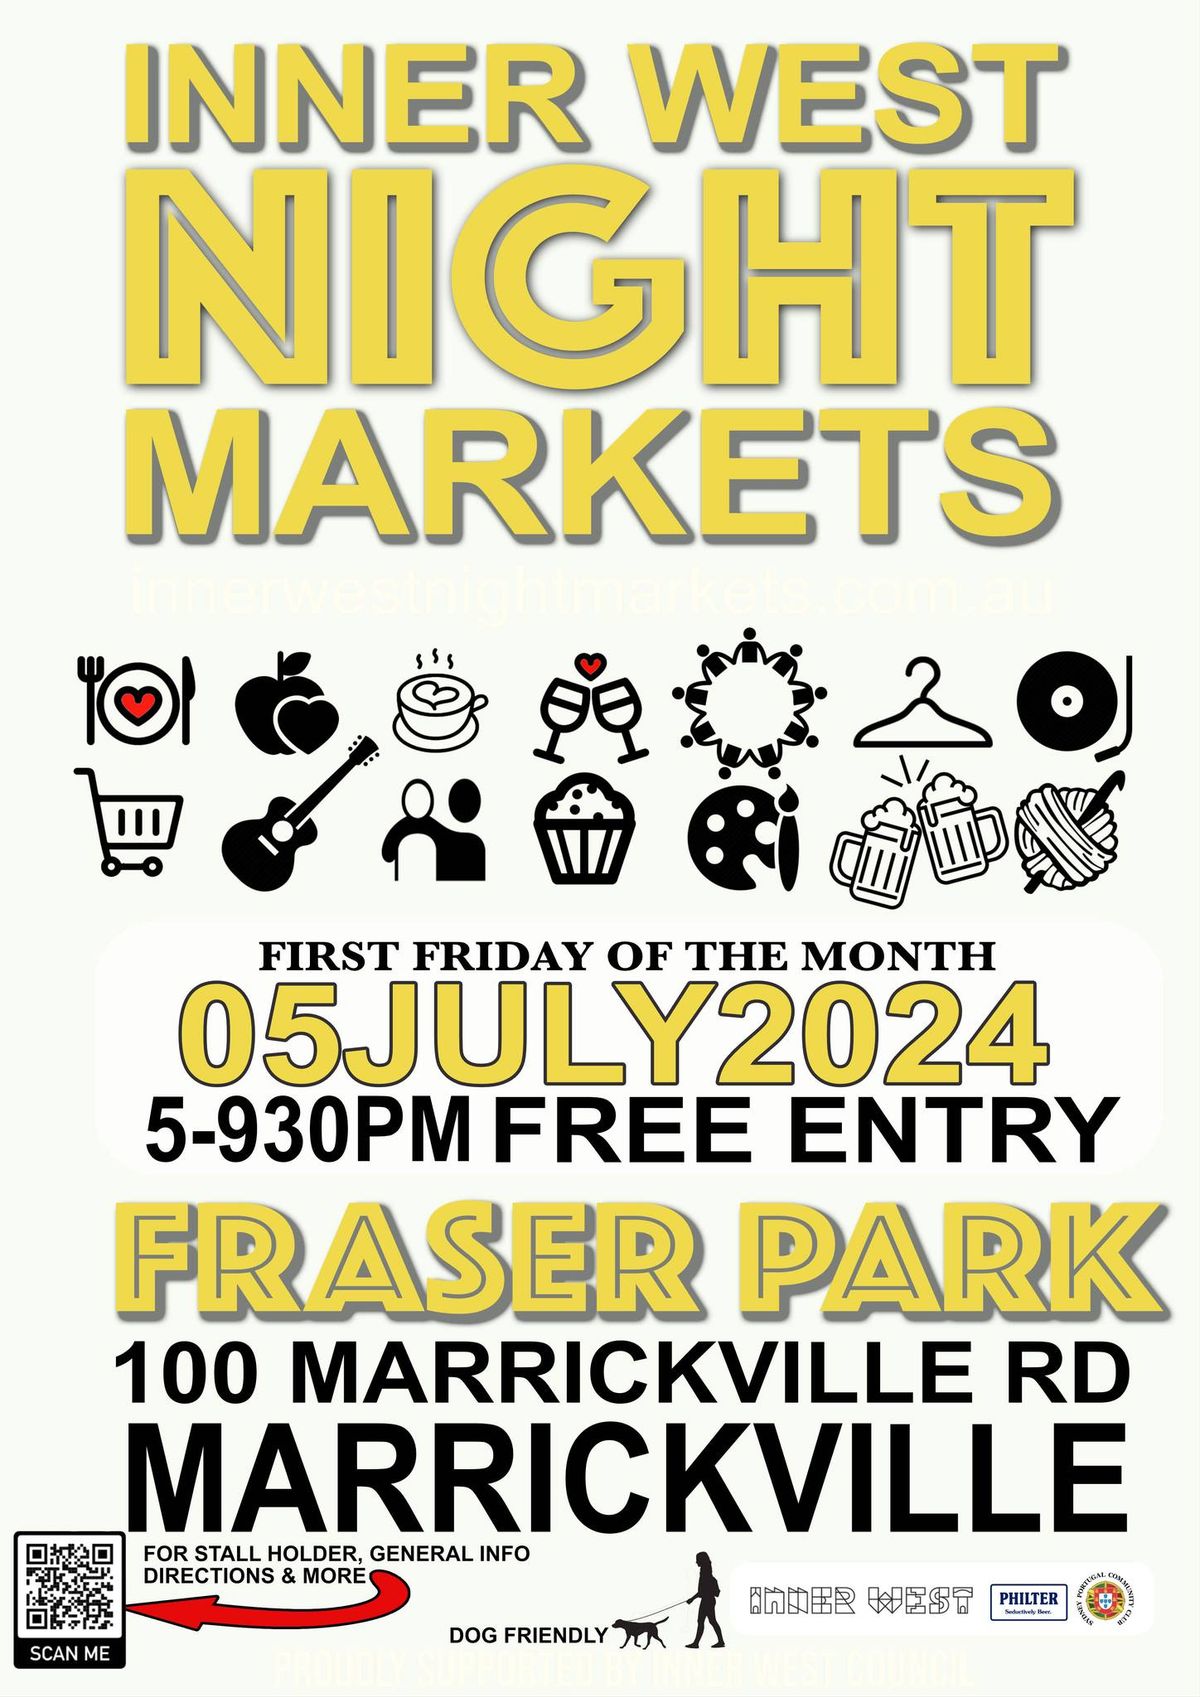 Inner West Night Markets 07JULY24 FREE ENTRY